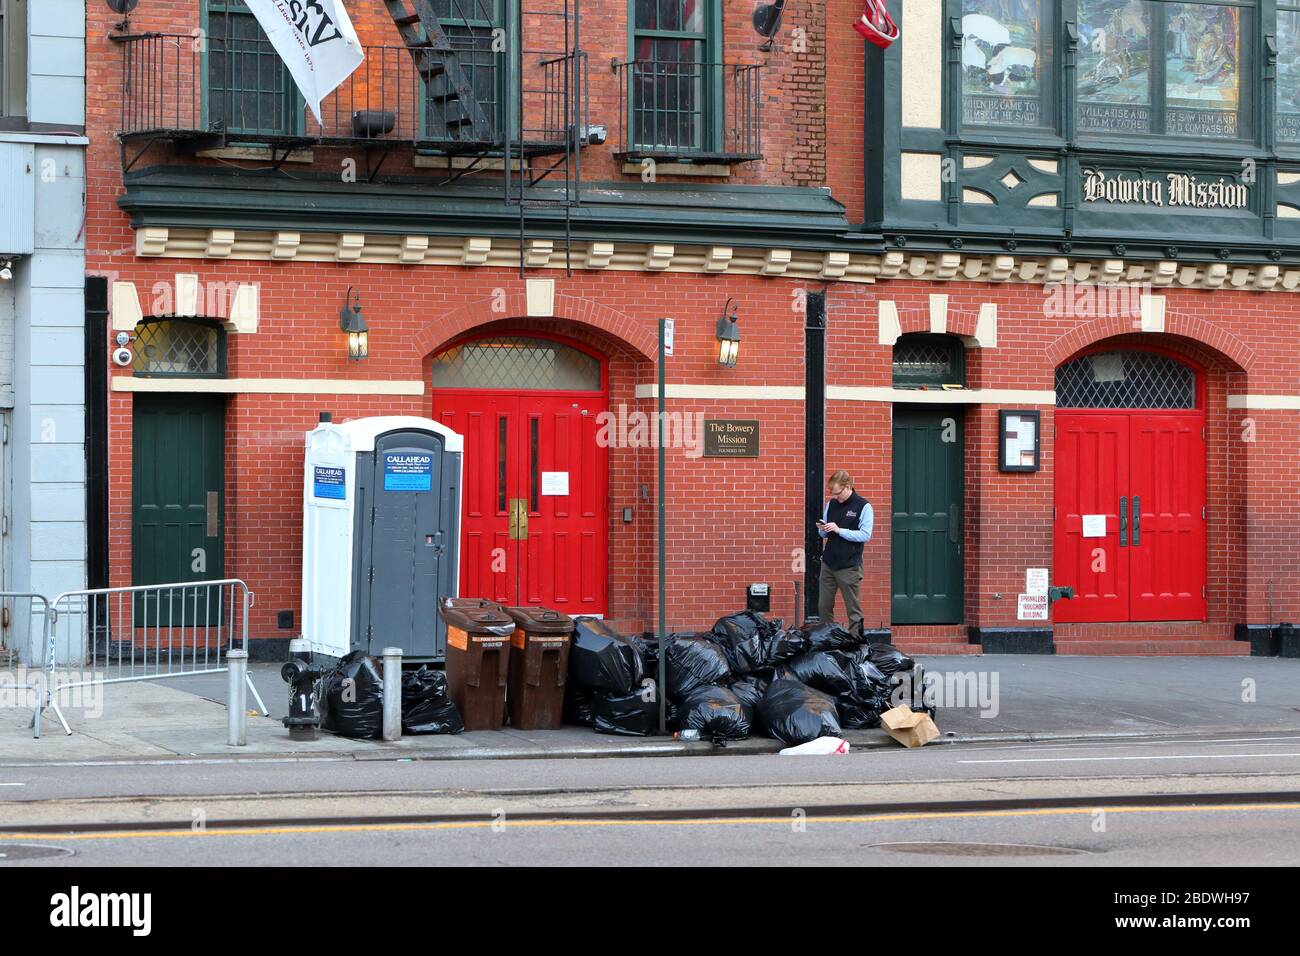 Interim CEO James Winans outside the Bowery Mission in New York during the coronavirus COVID-19 crisis... SEE MORE INFO FOR FULL CAPTION. Stock Photo